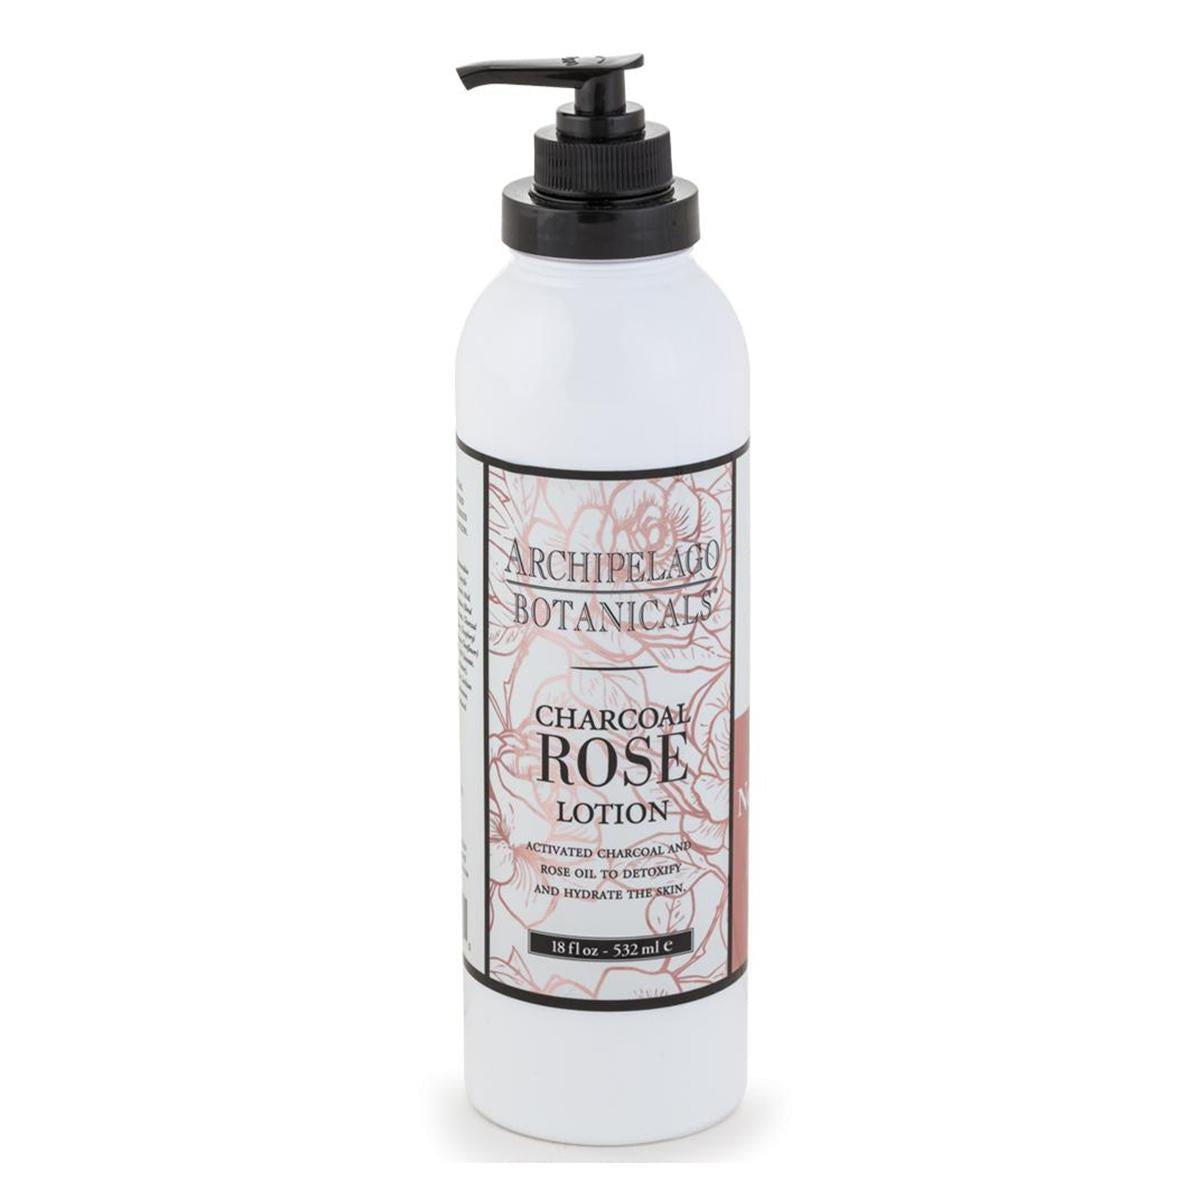 Primary image of Charcoal Rose Lotion